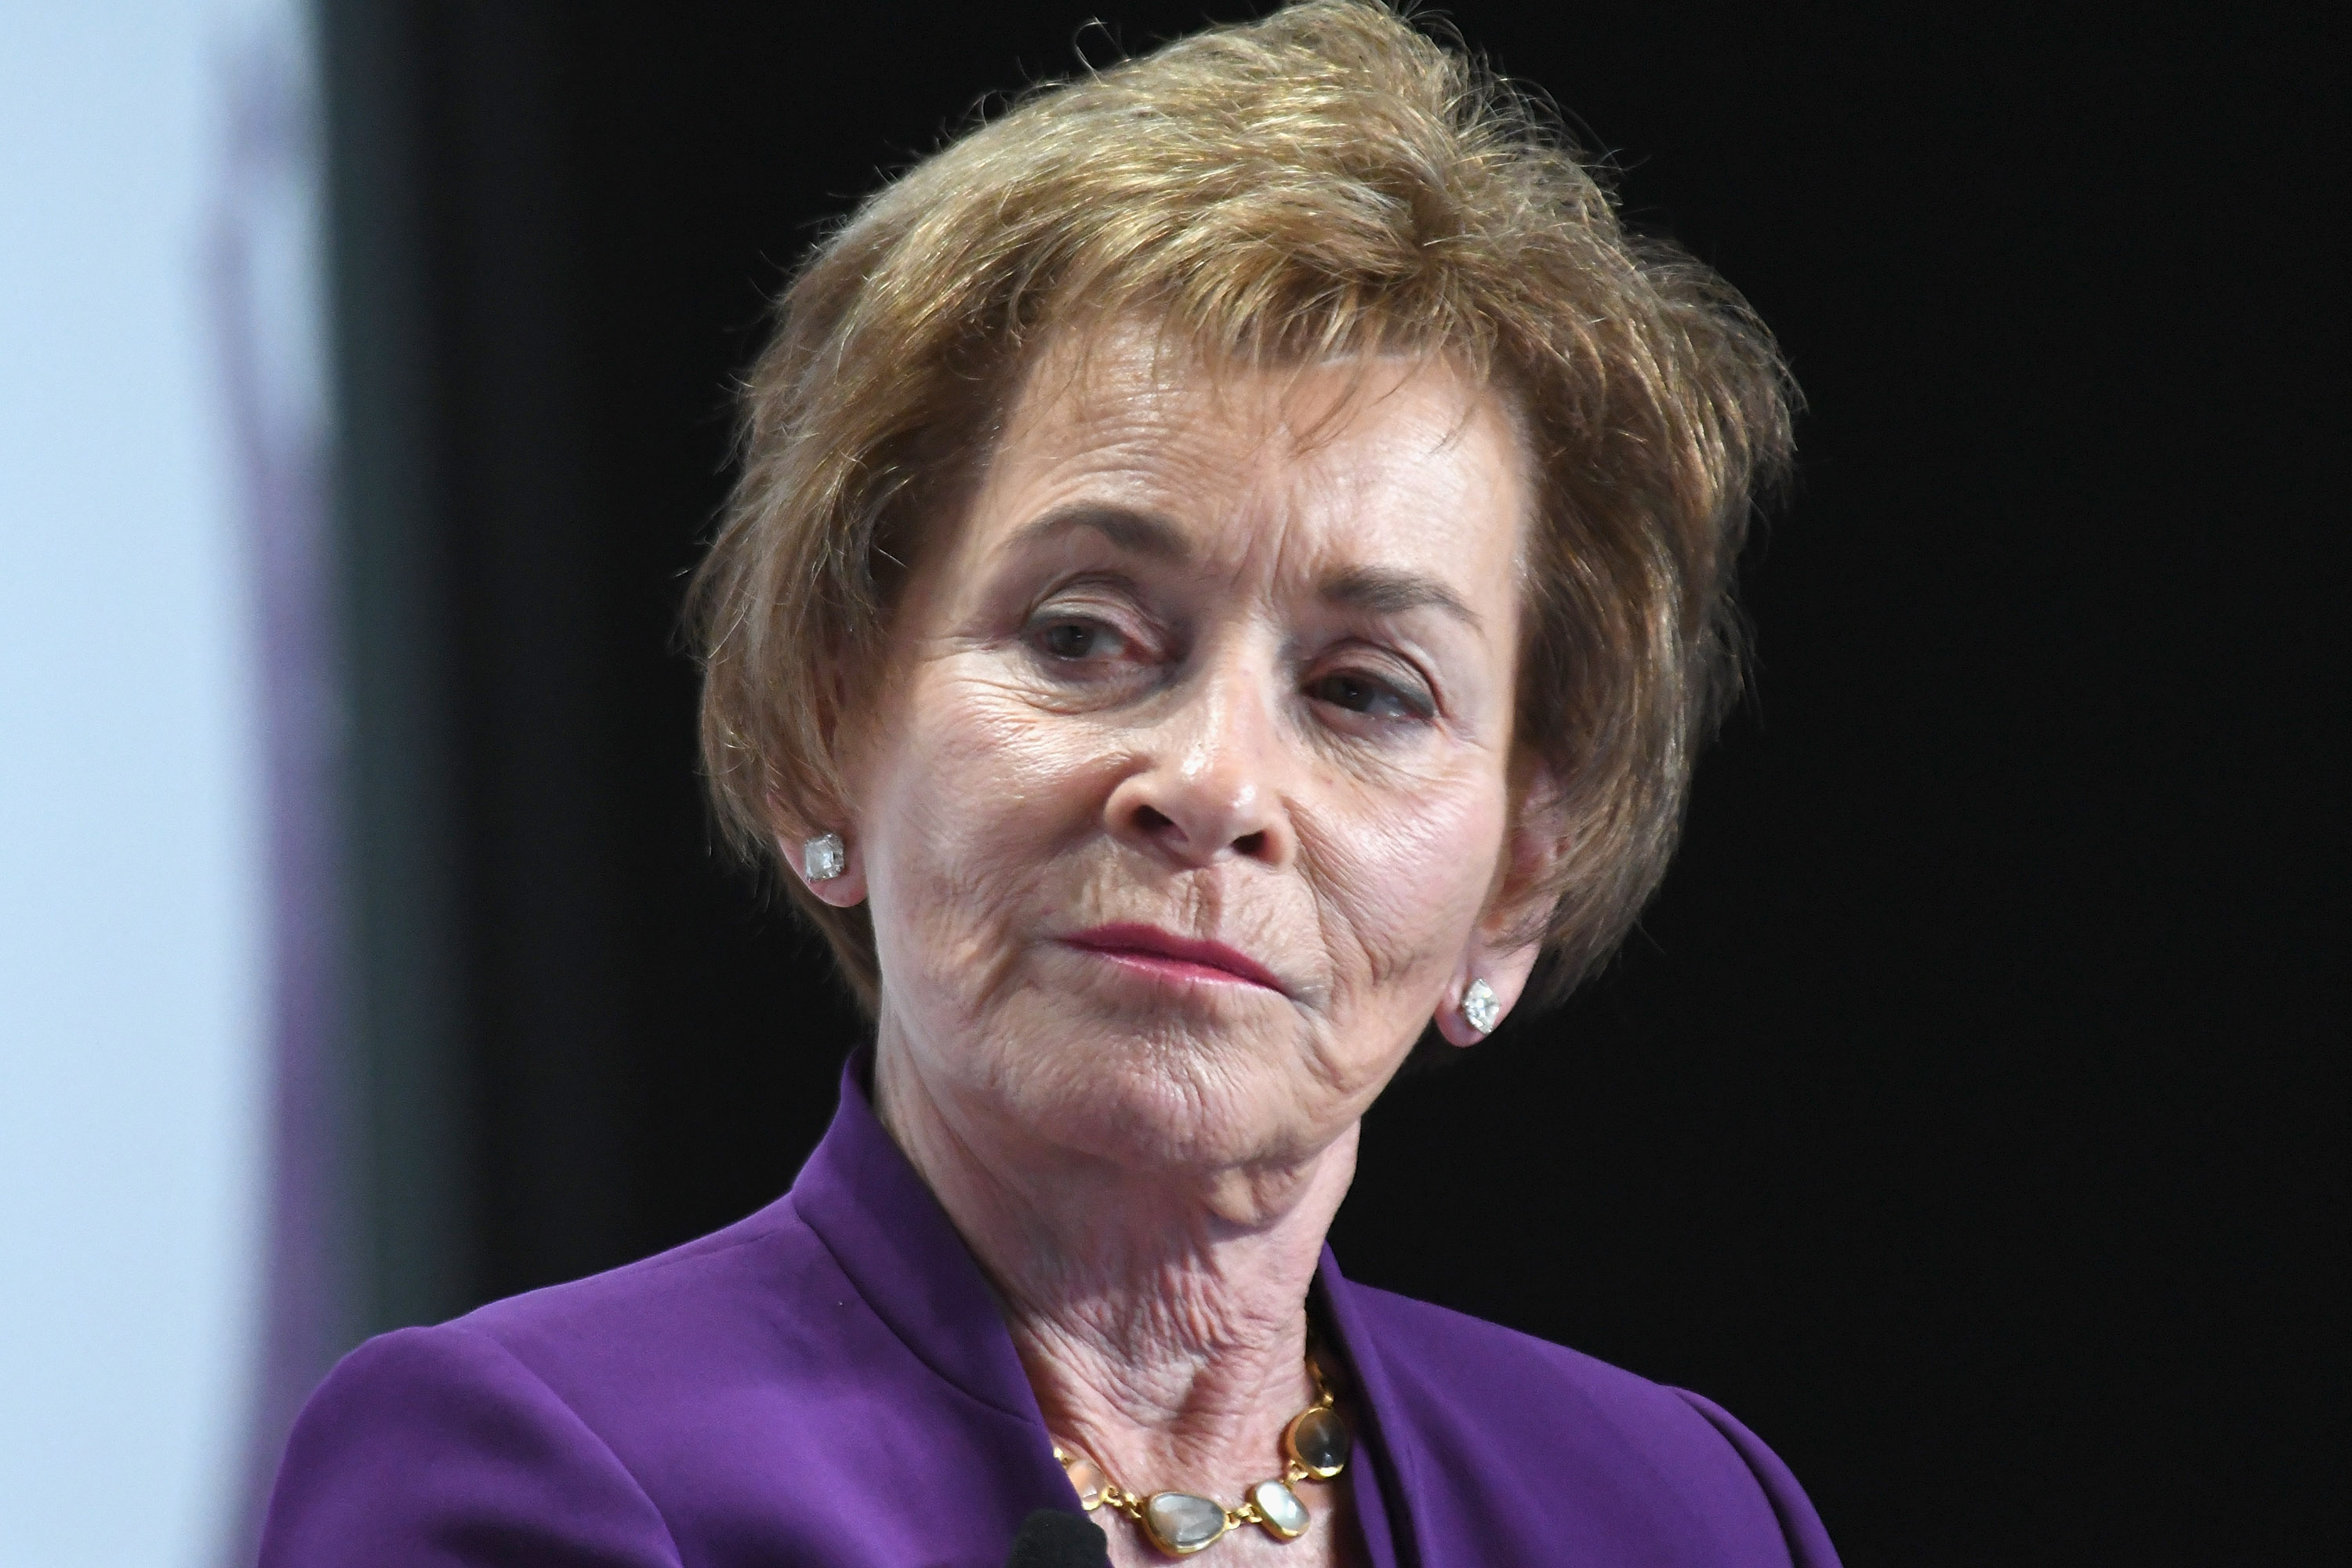 Donald Trump should take election challenge to Judge Judy, Twitter users su...